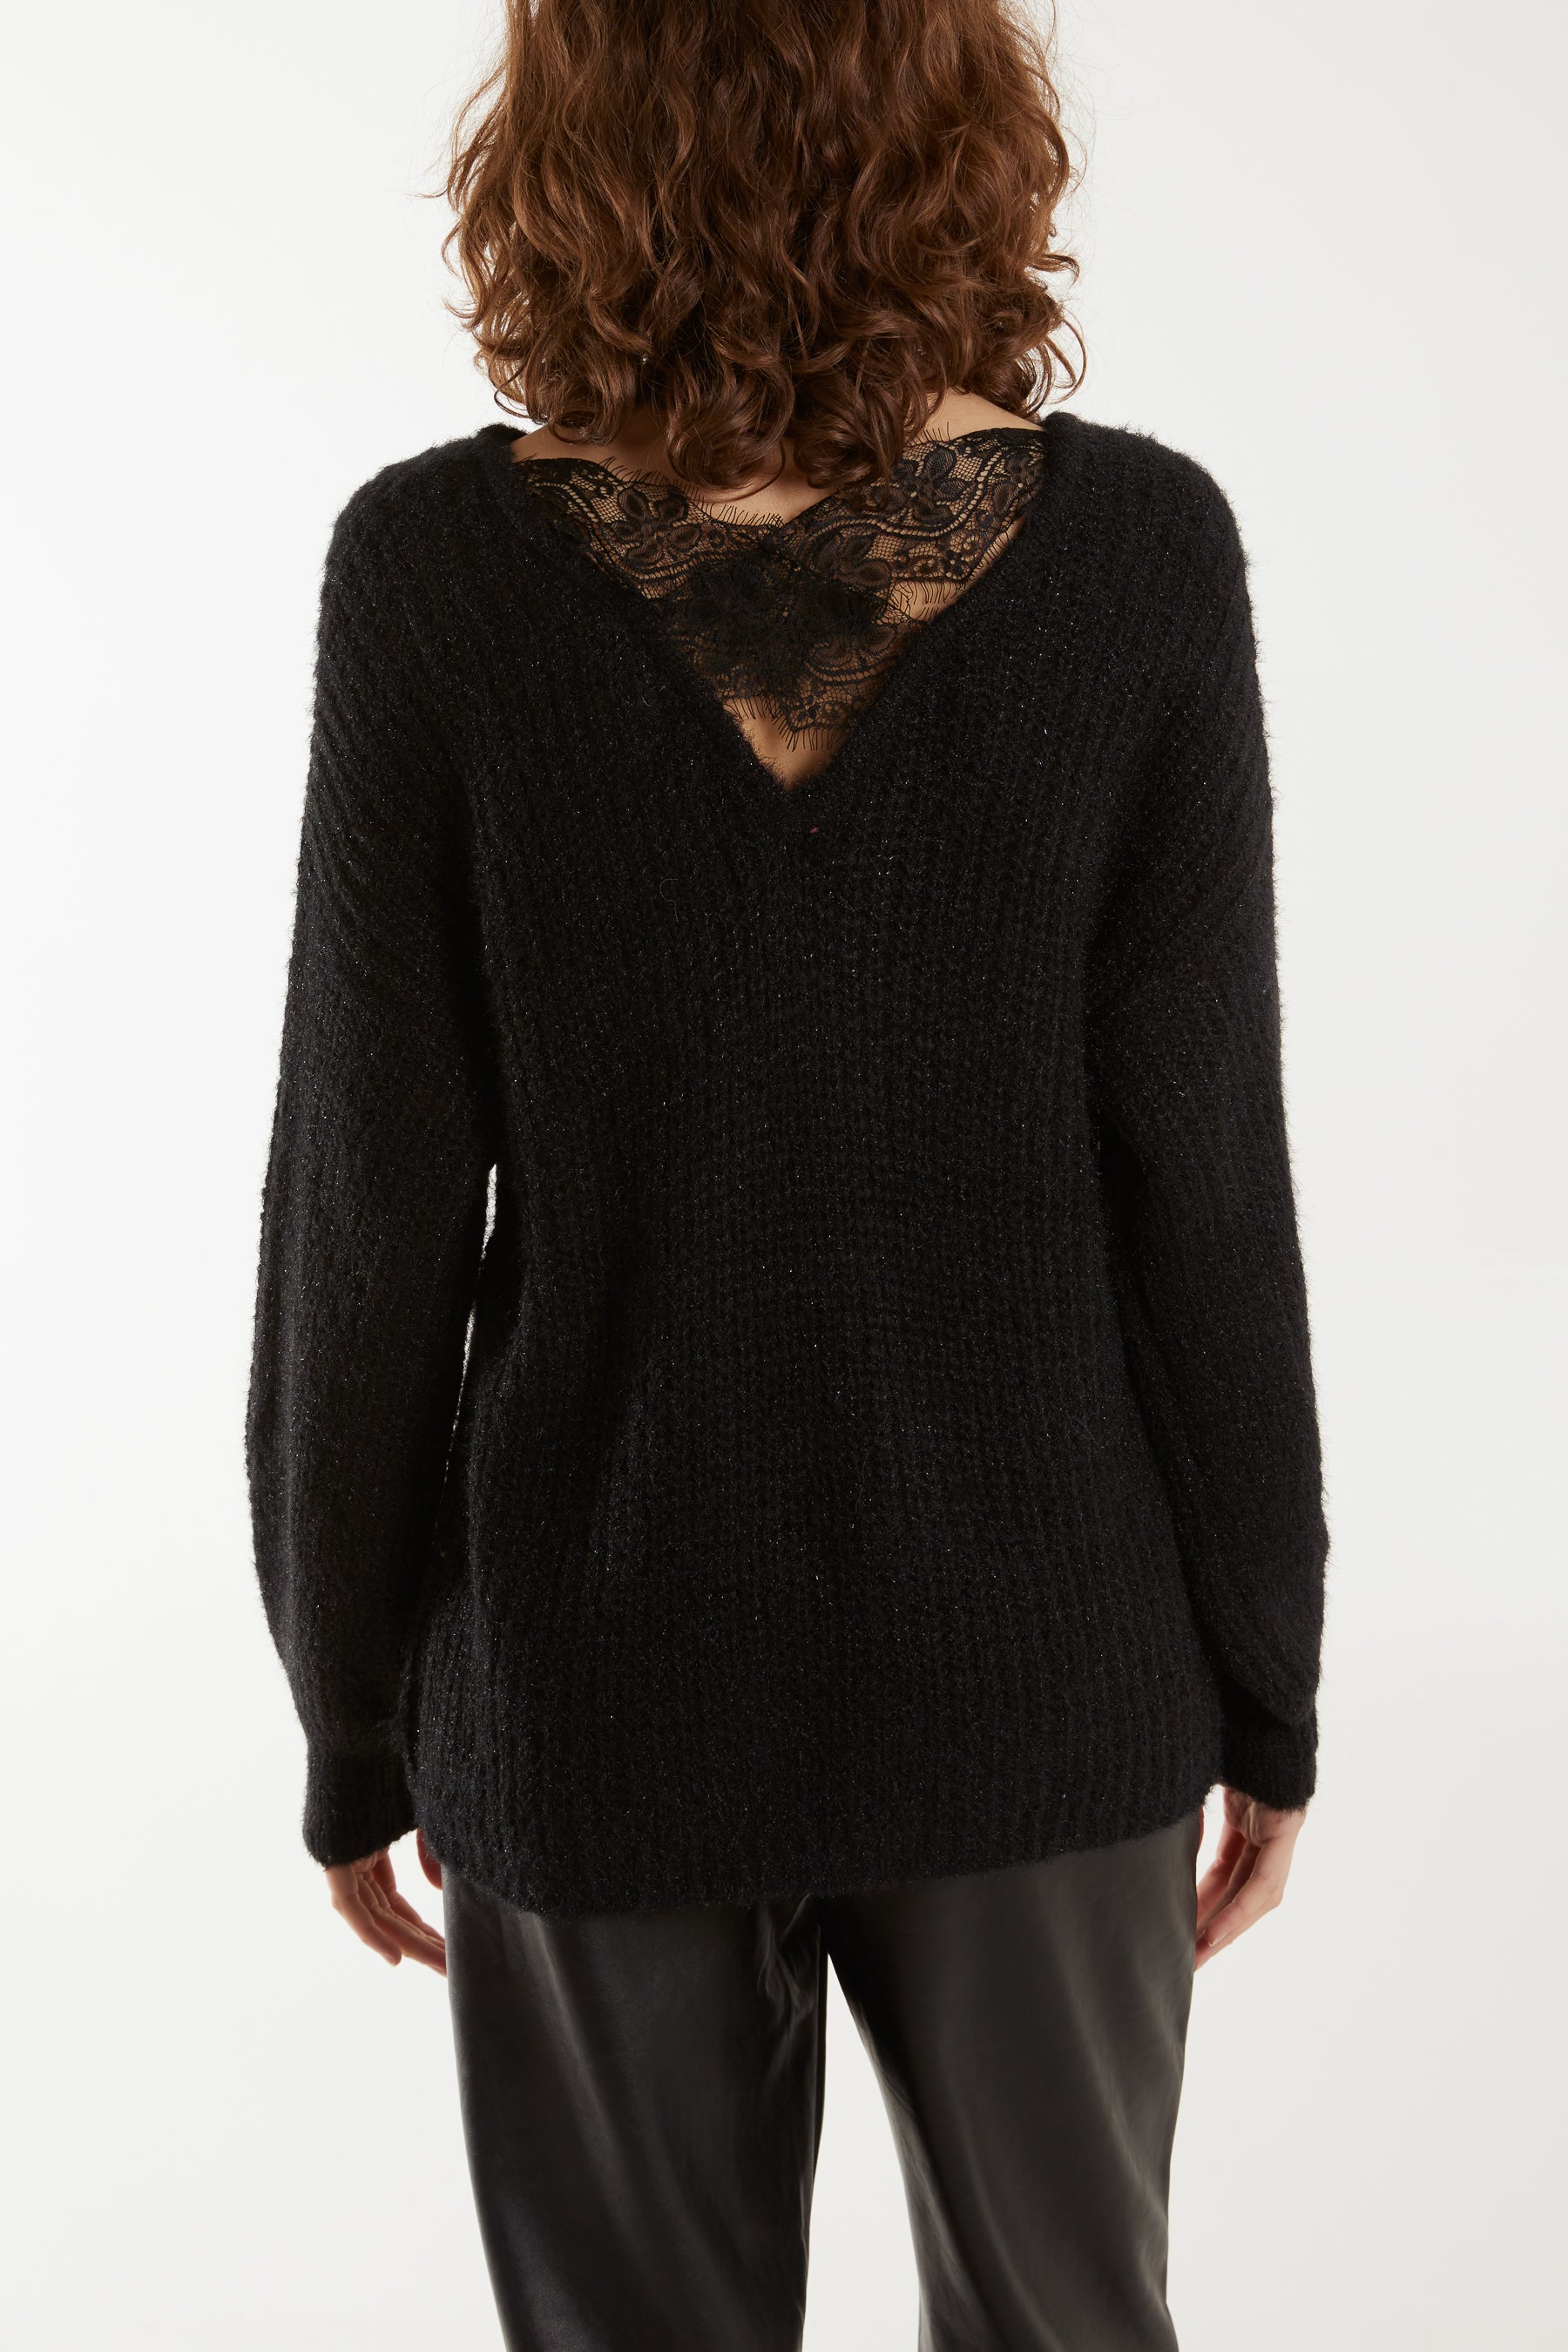 Lace Cross Back Knitted Jumper